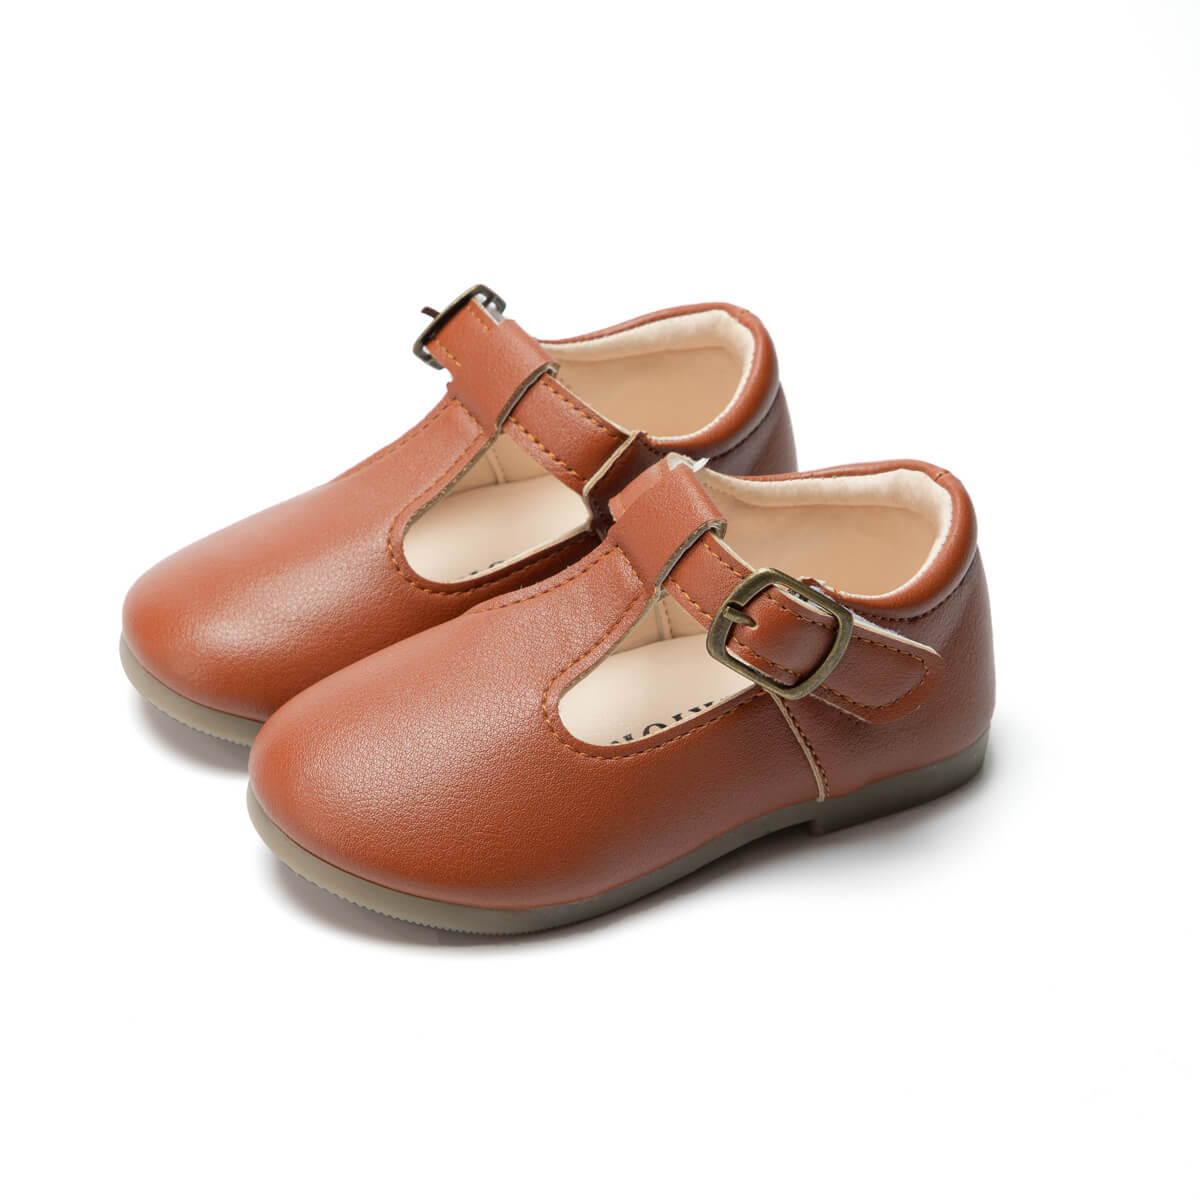 Asher 1st Walker Baby Shoes - Tan